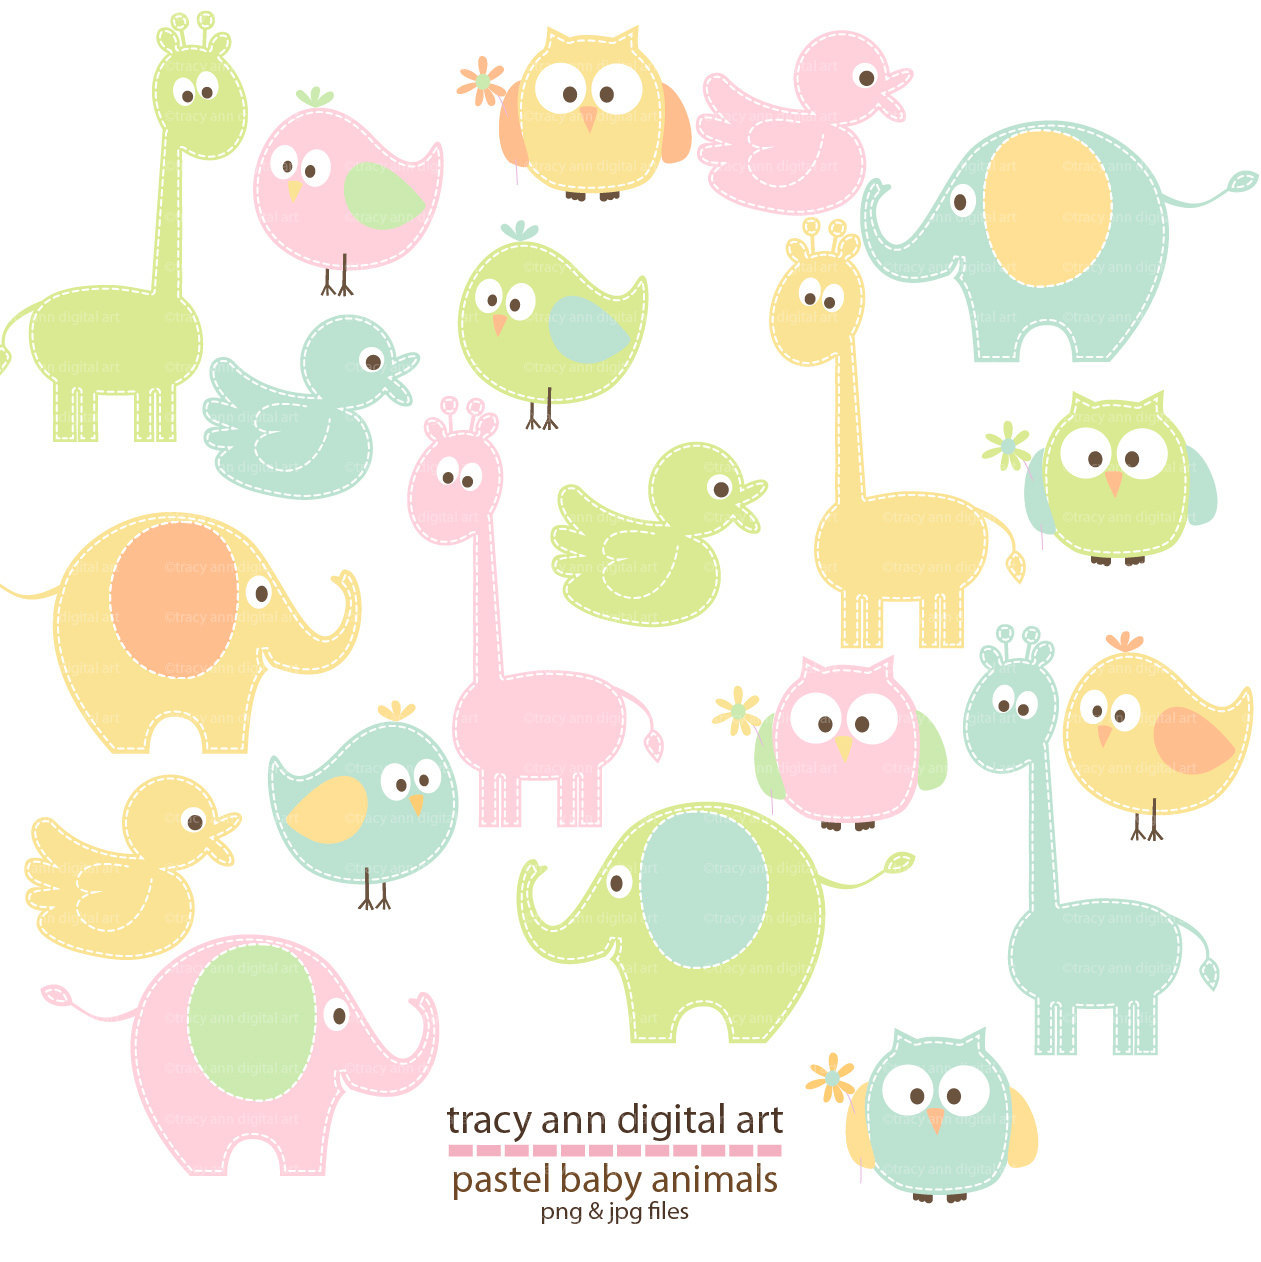 Popular items for baby animals clipart on Etsy